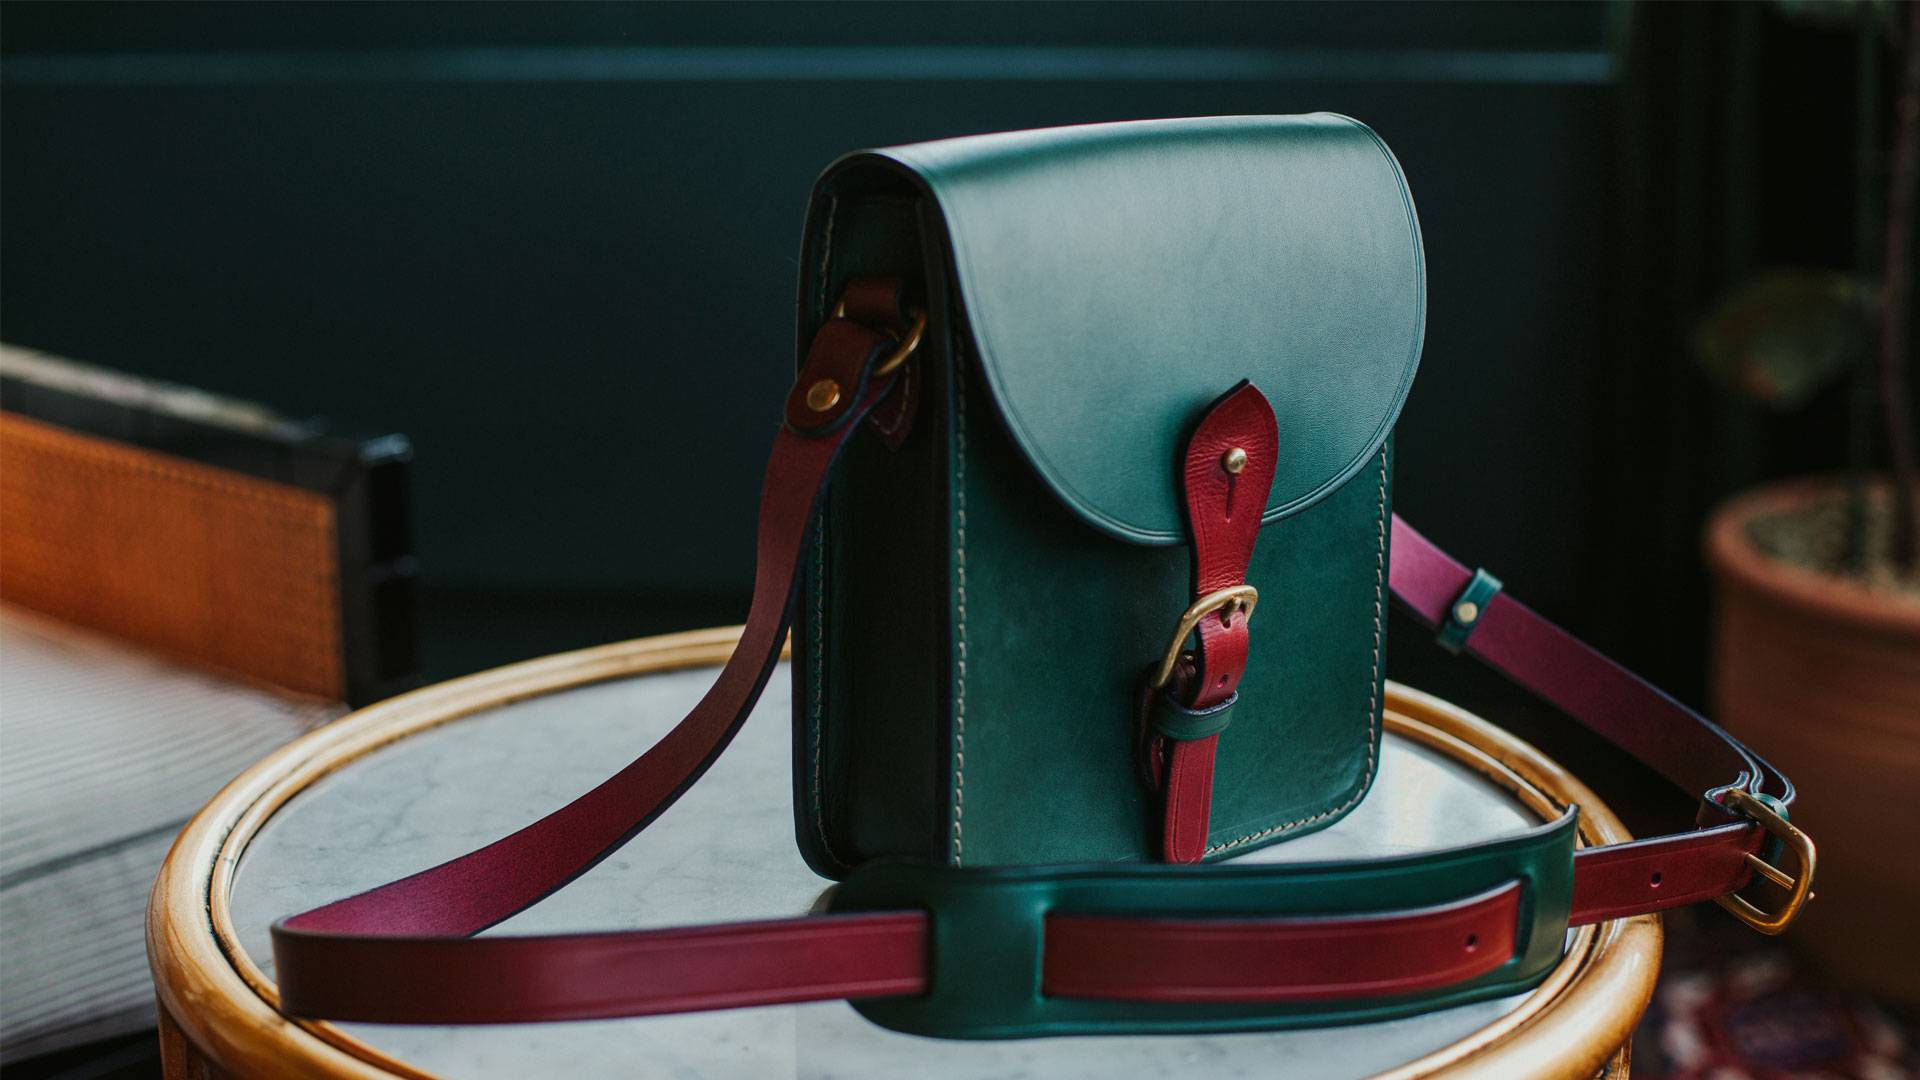 Book bag in Italian saddle two tones green and burgundy.